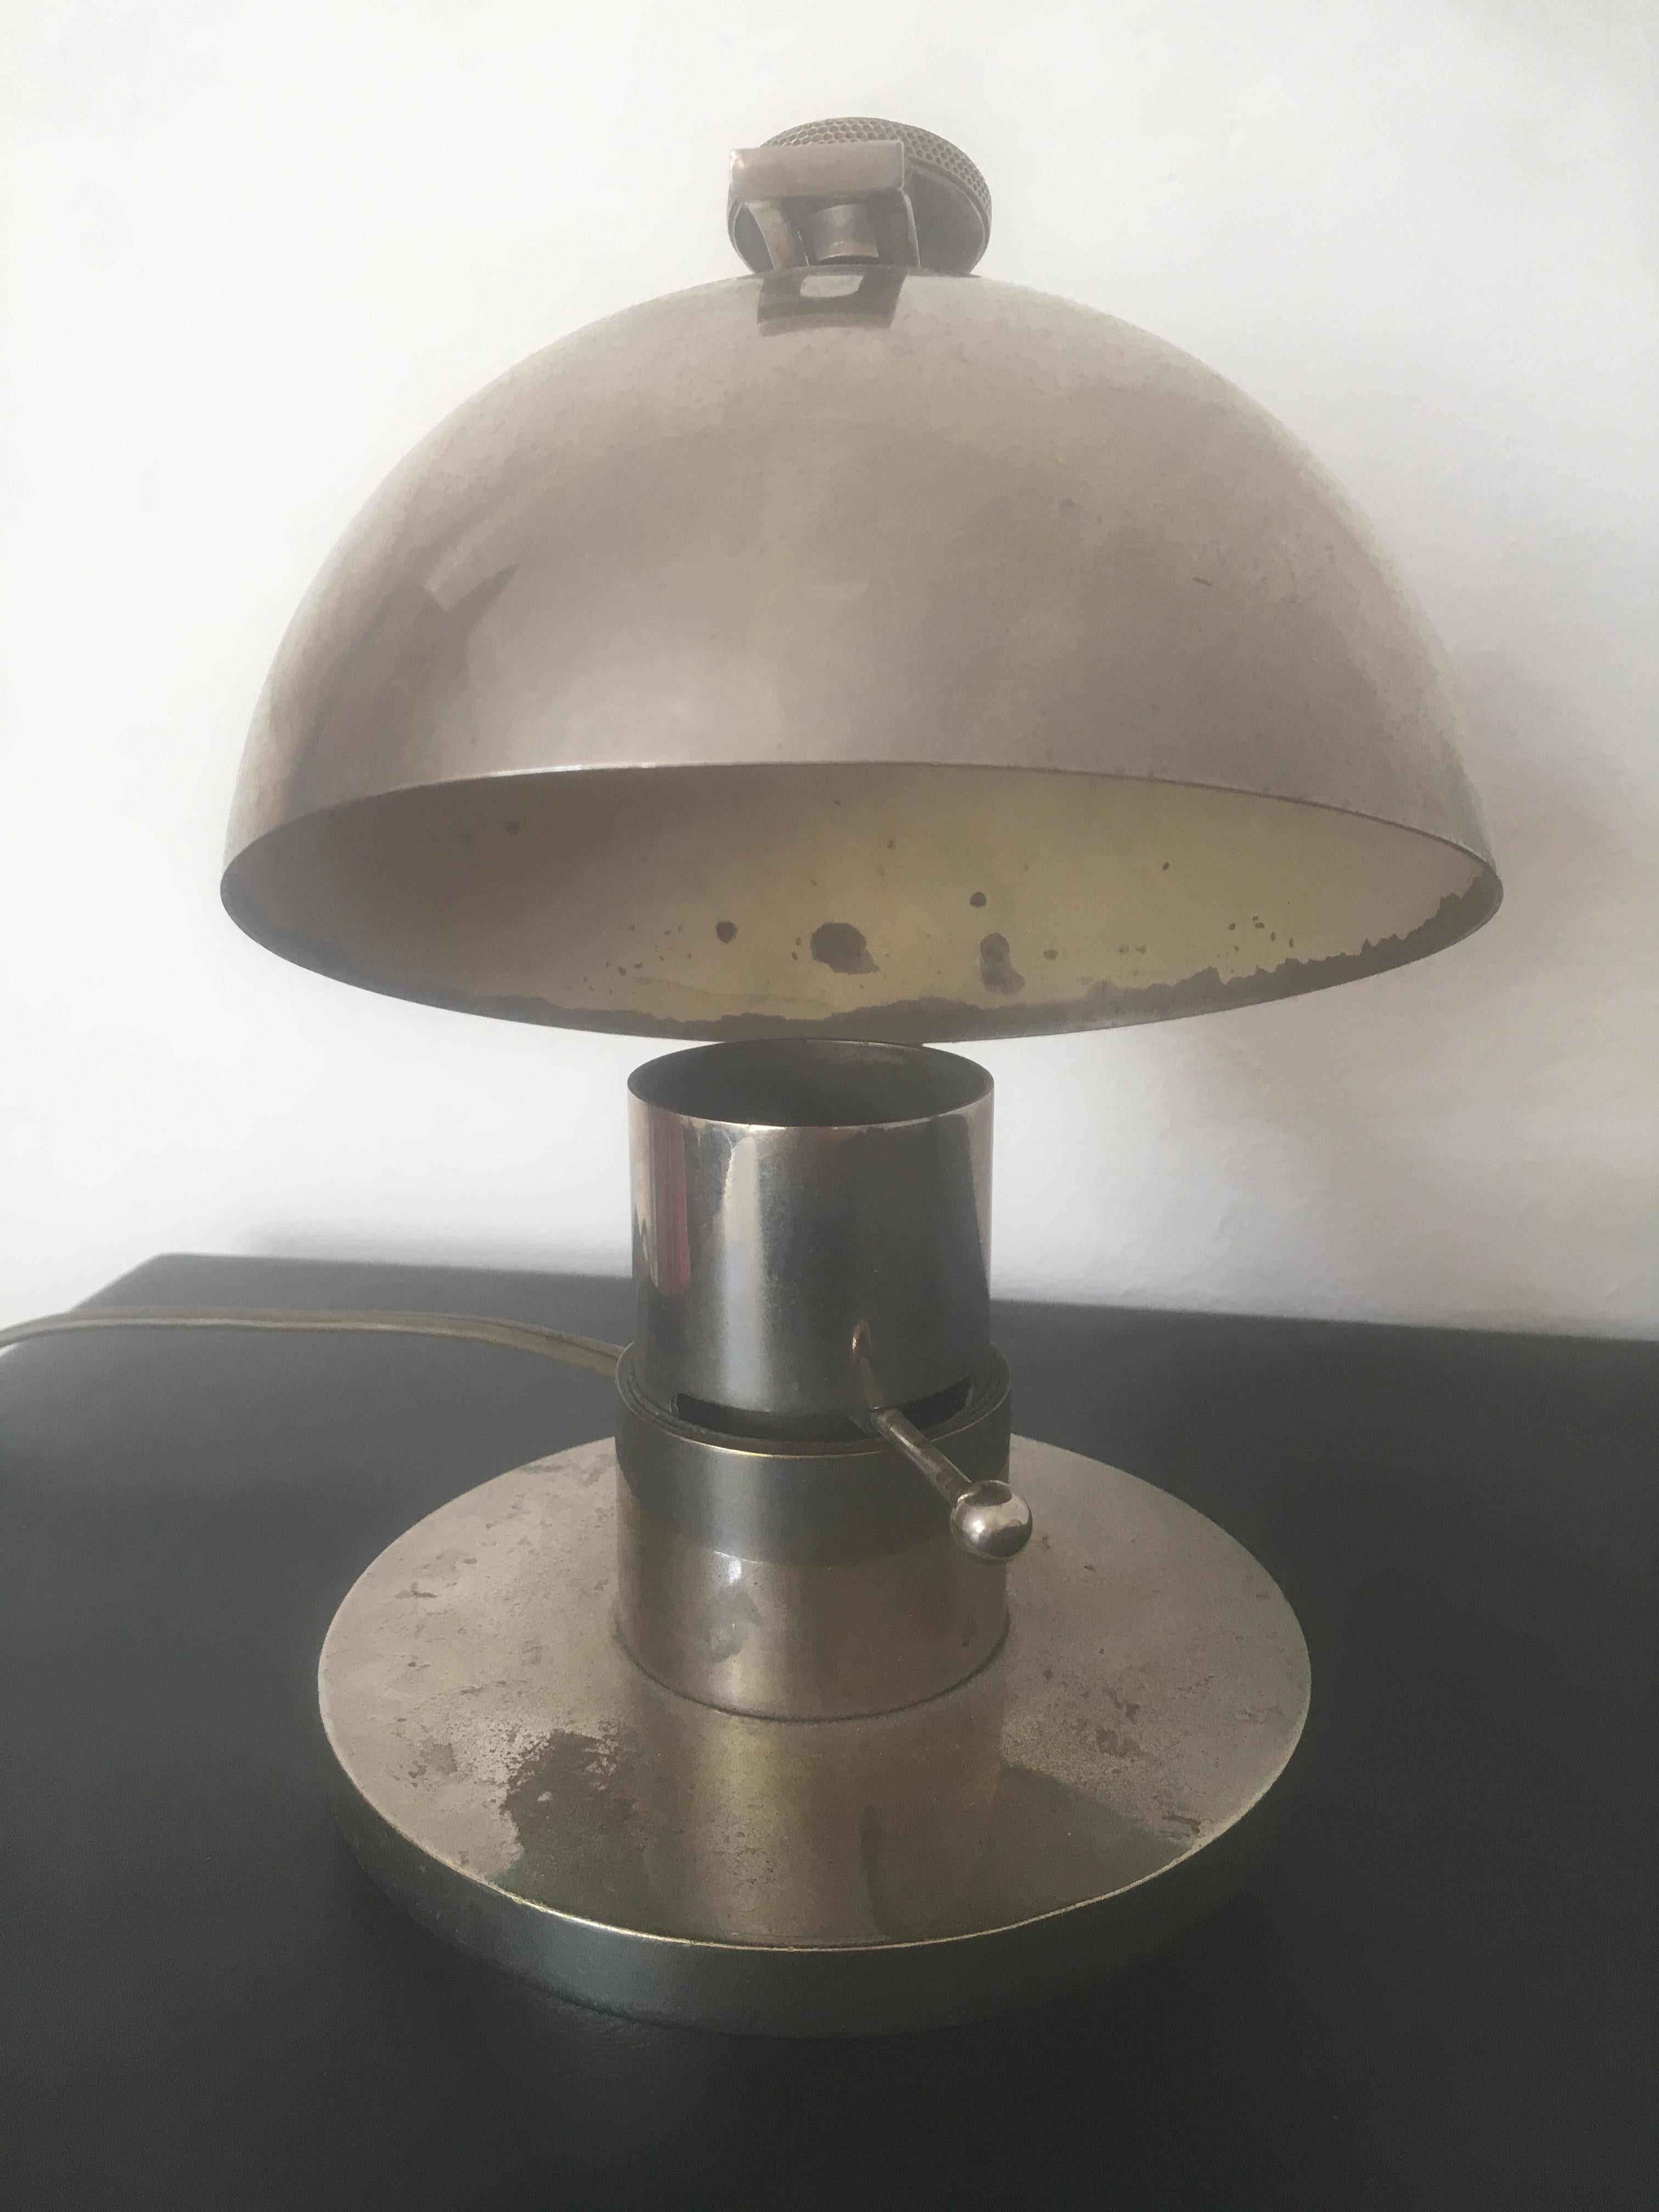 Maison Desny Art Deco Modernist Nickeled Metal Table Lamp, French, 1930s In Good Condition For Sale In Aix En Provence, FR